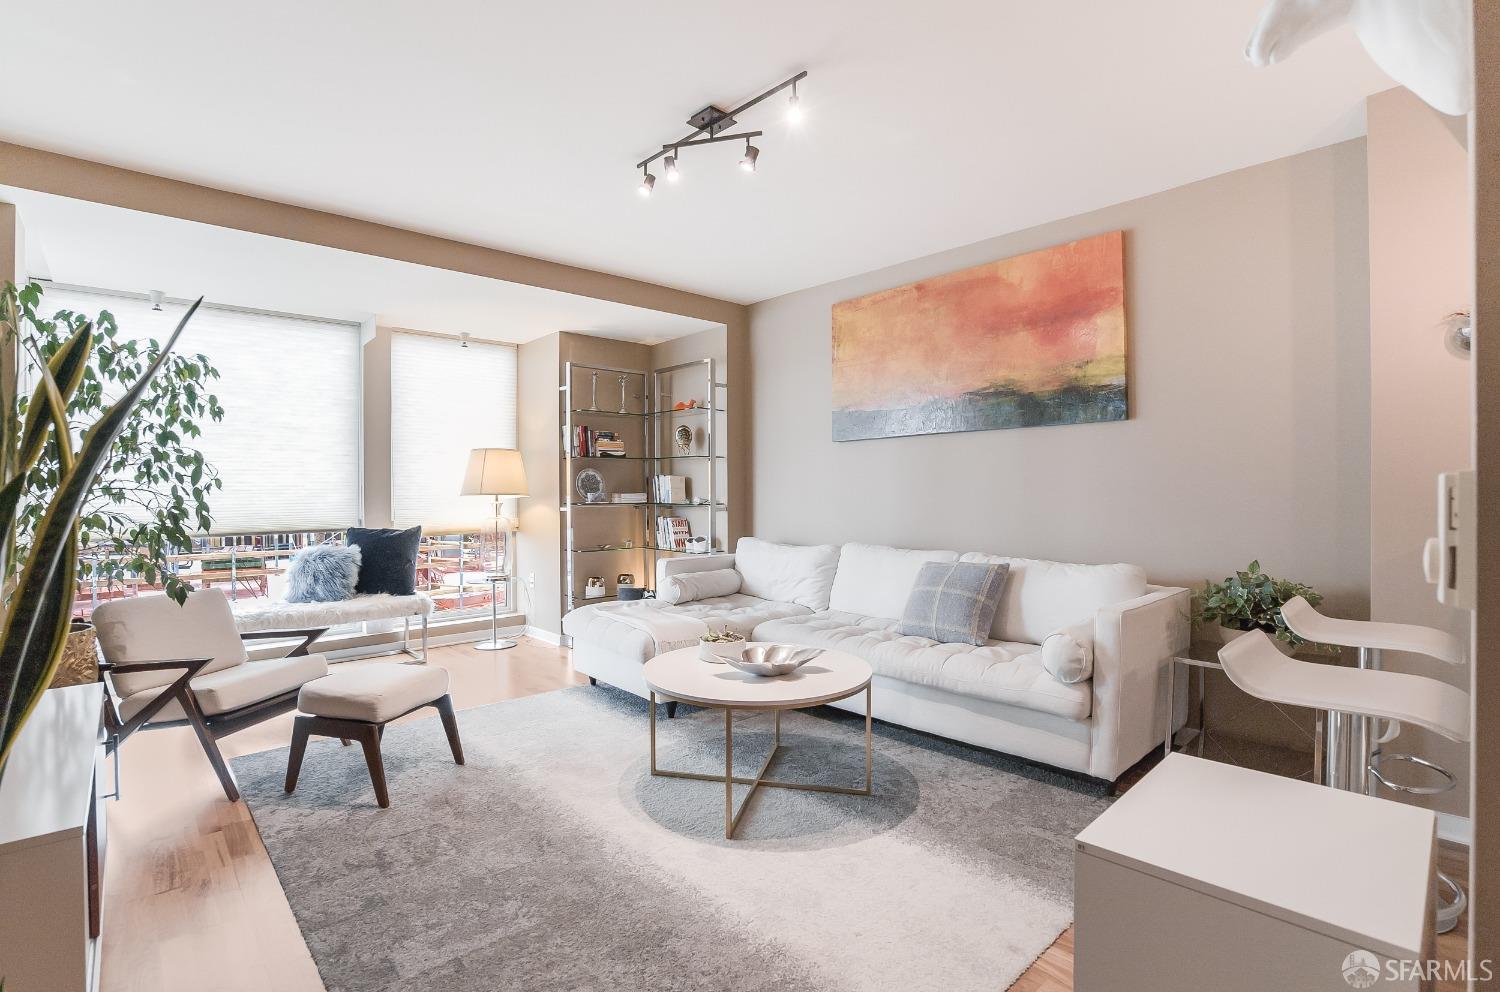 555 4th Street Unit 635, San Francisco, California, 94107, United States, 1 Bedroom Bedrooms, ,1 BathroomBathrooms,Residential,For Sale,555 4th Street Unit 635,1488389